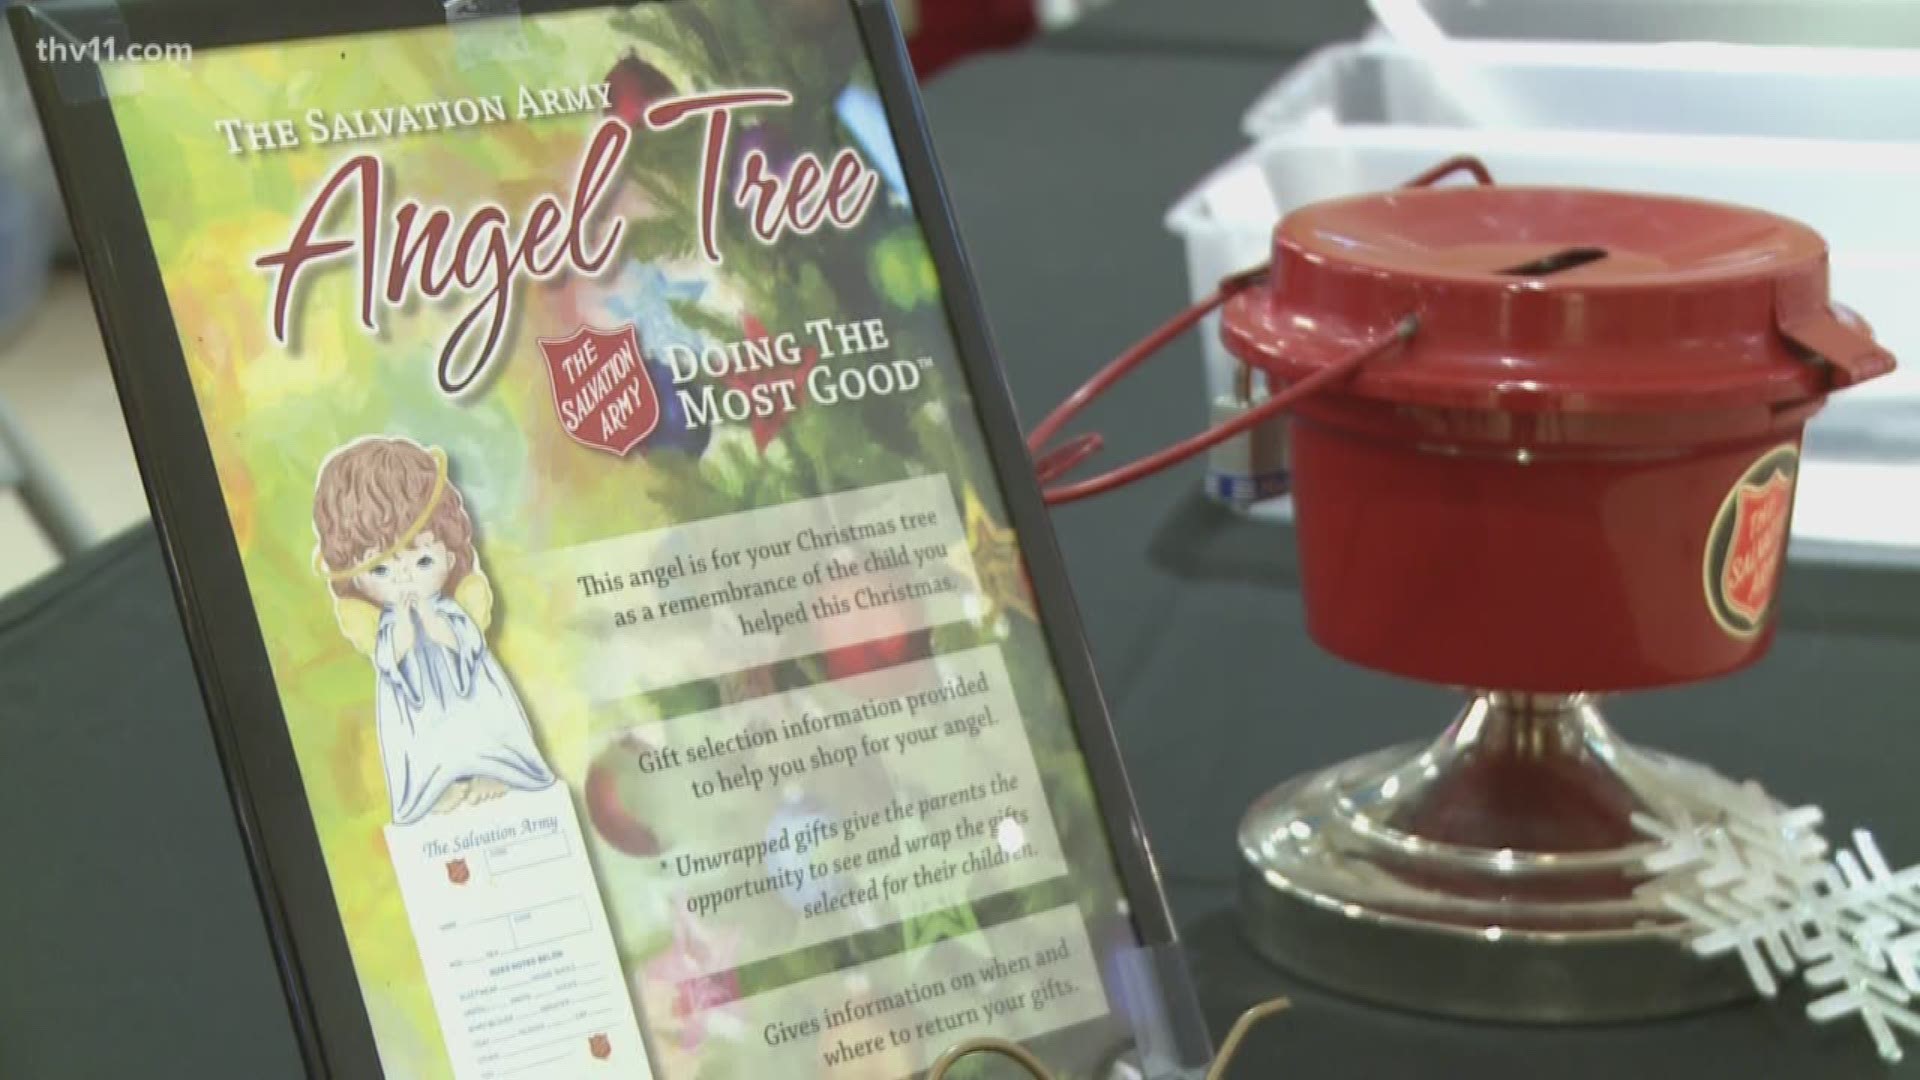 We're just a little over two weeks away from Christmas and organizers for the salvation army's angel tree program say they're needing help, now, more than ever.